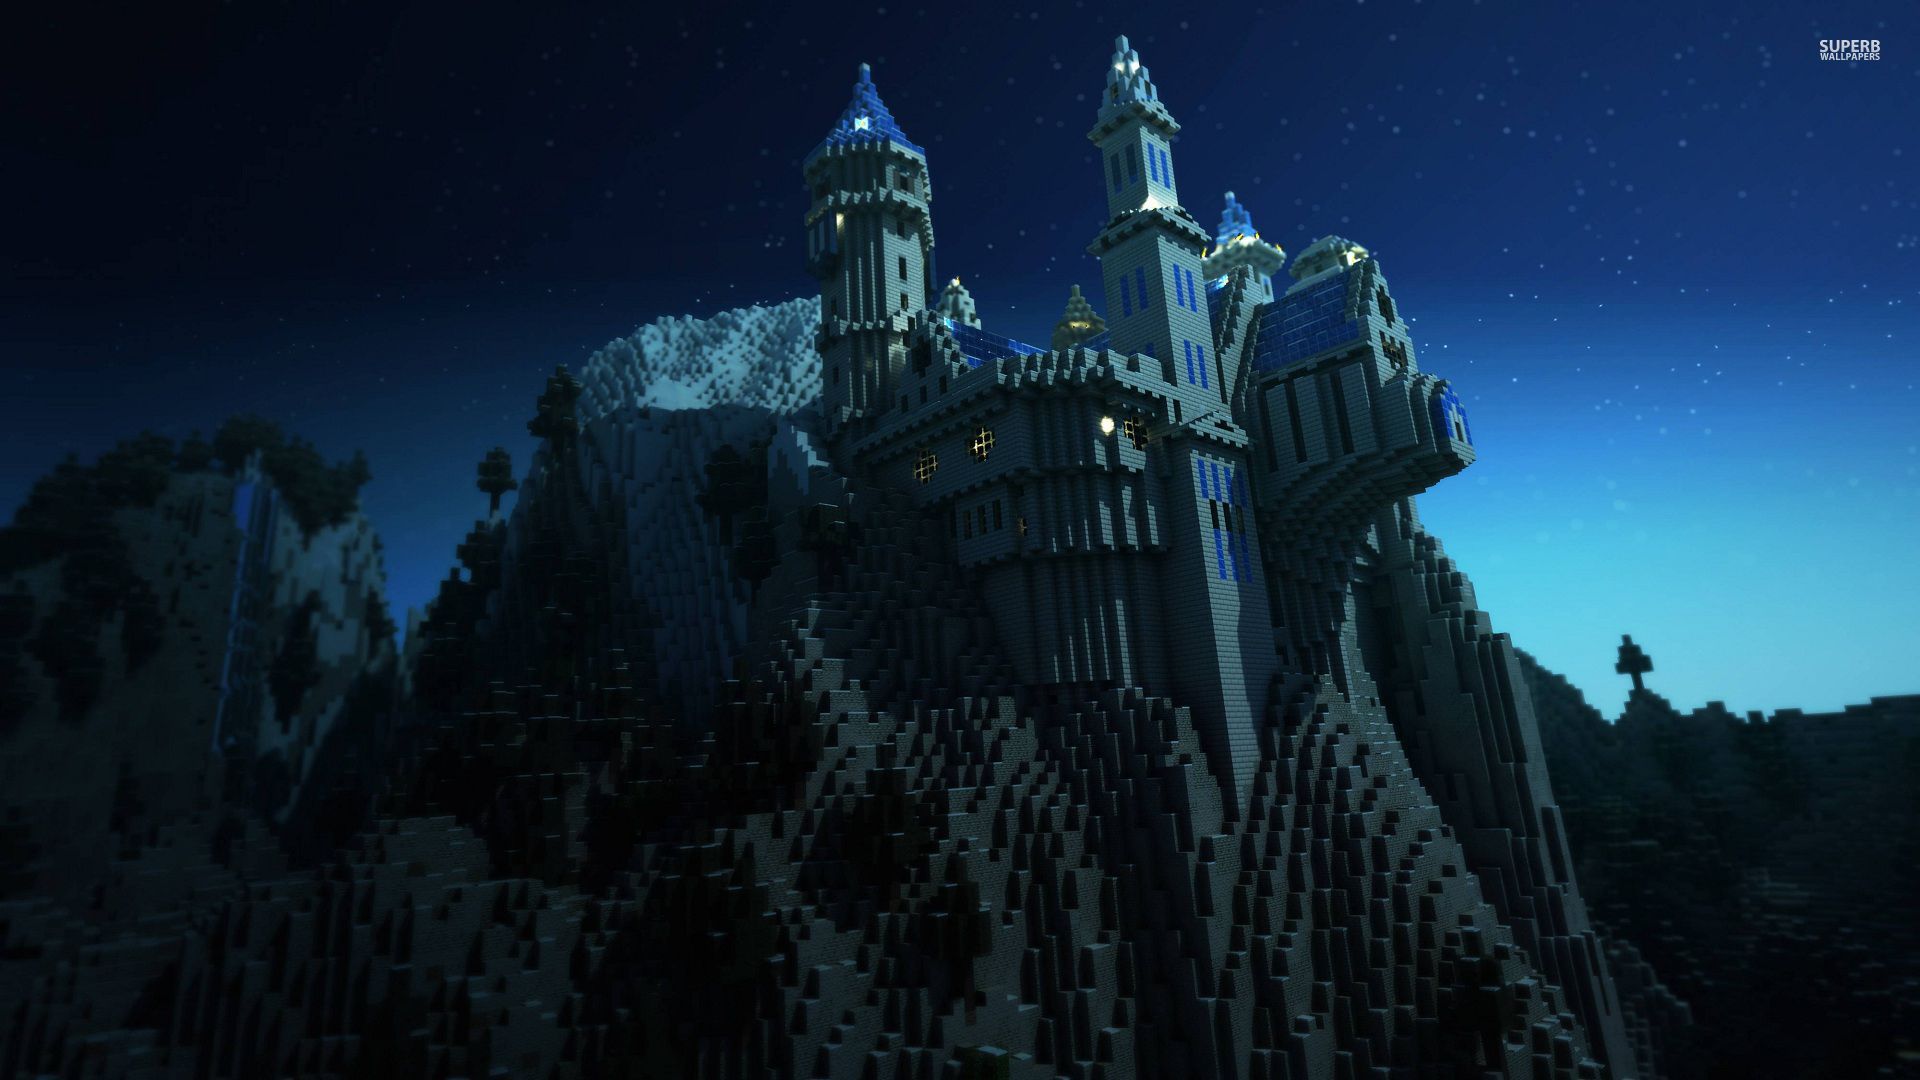 castle-on-a-cliff-in-minecraft-51748-1920x1080.jpg